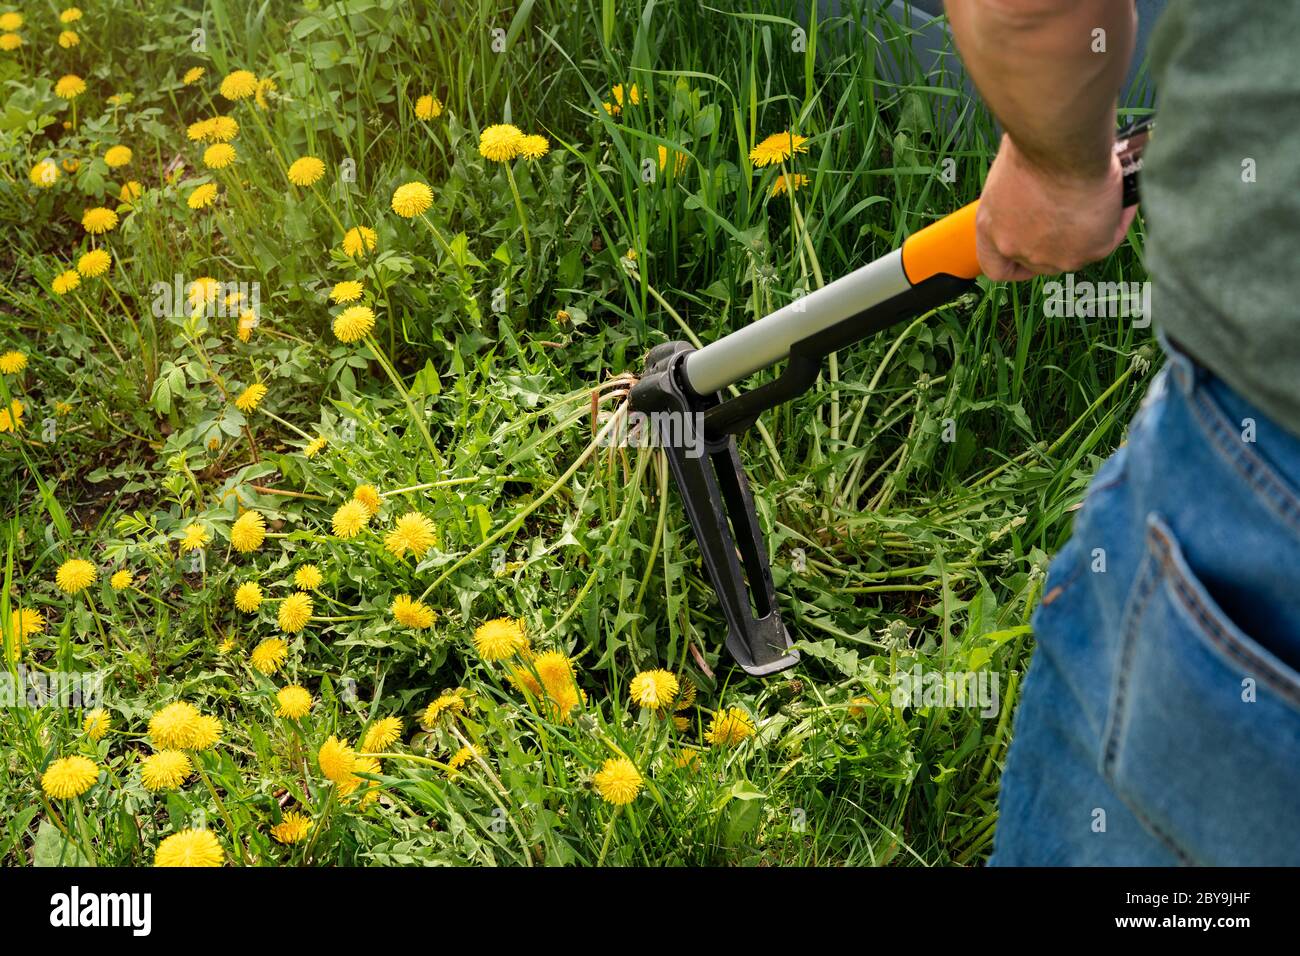 Gardener removing weeds from yard. Device for removing dandelion weeds by pulling the tap root. Weed control. Dandelion removal and weeder lawn tool w Stock Photo